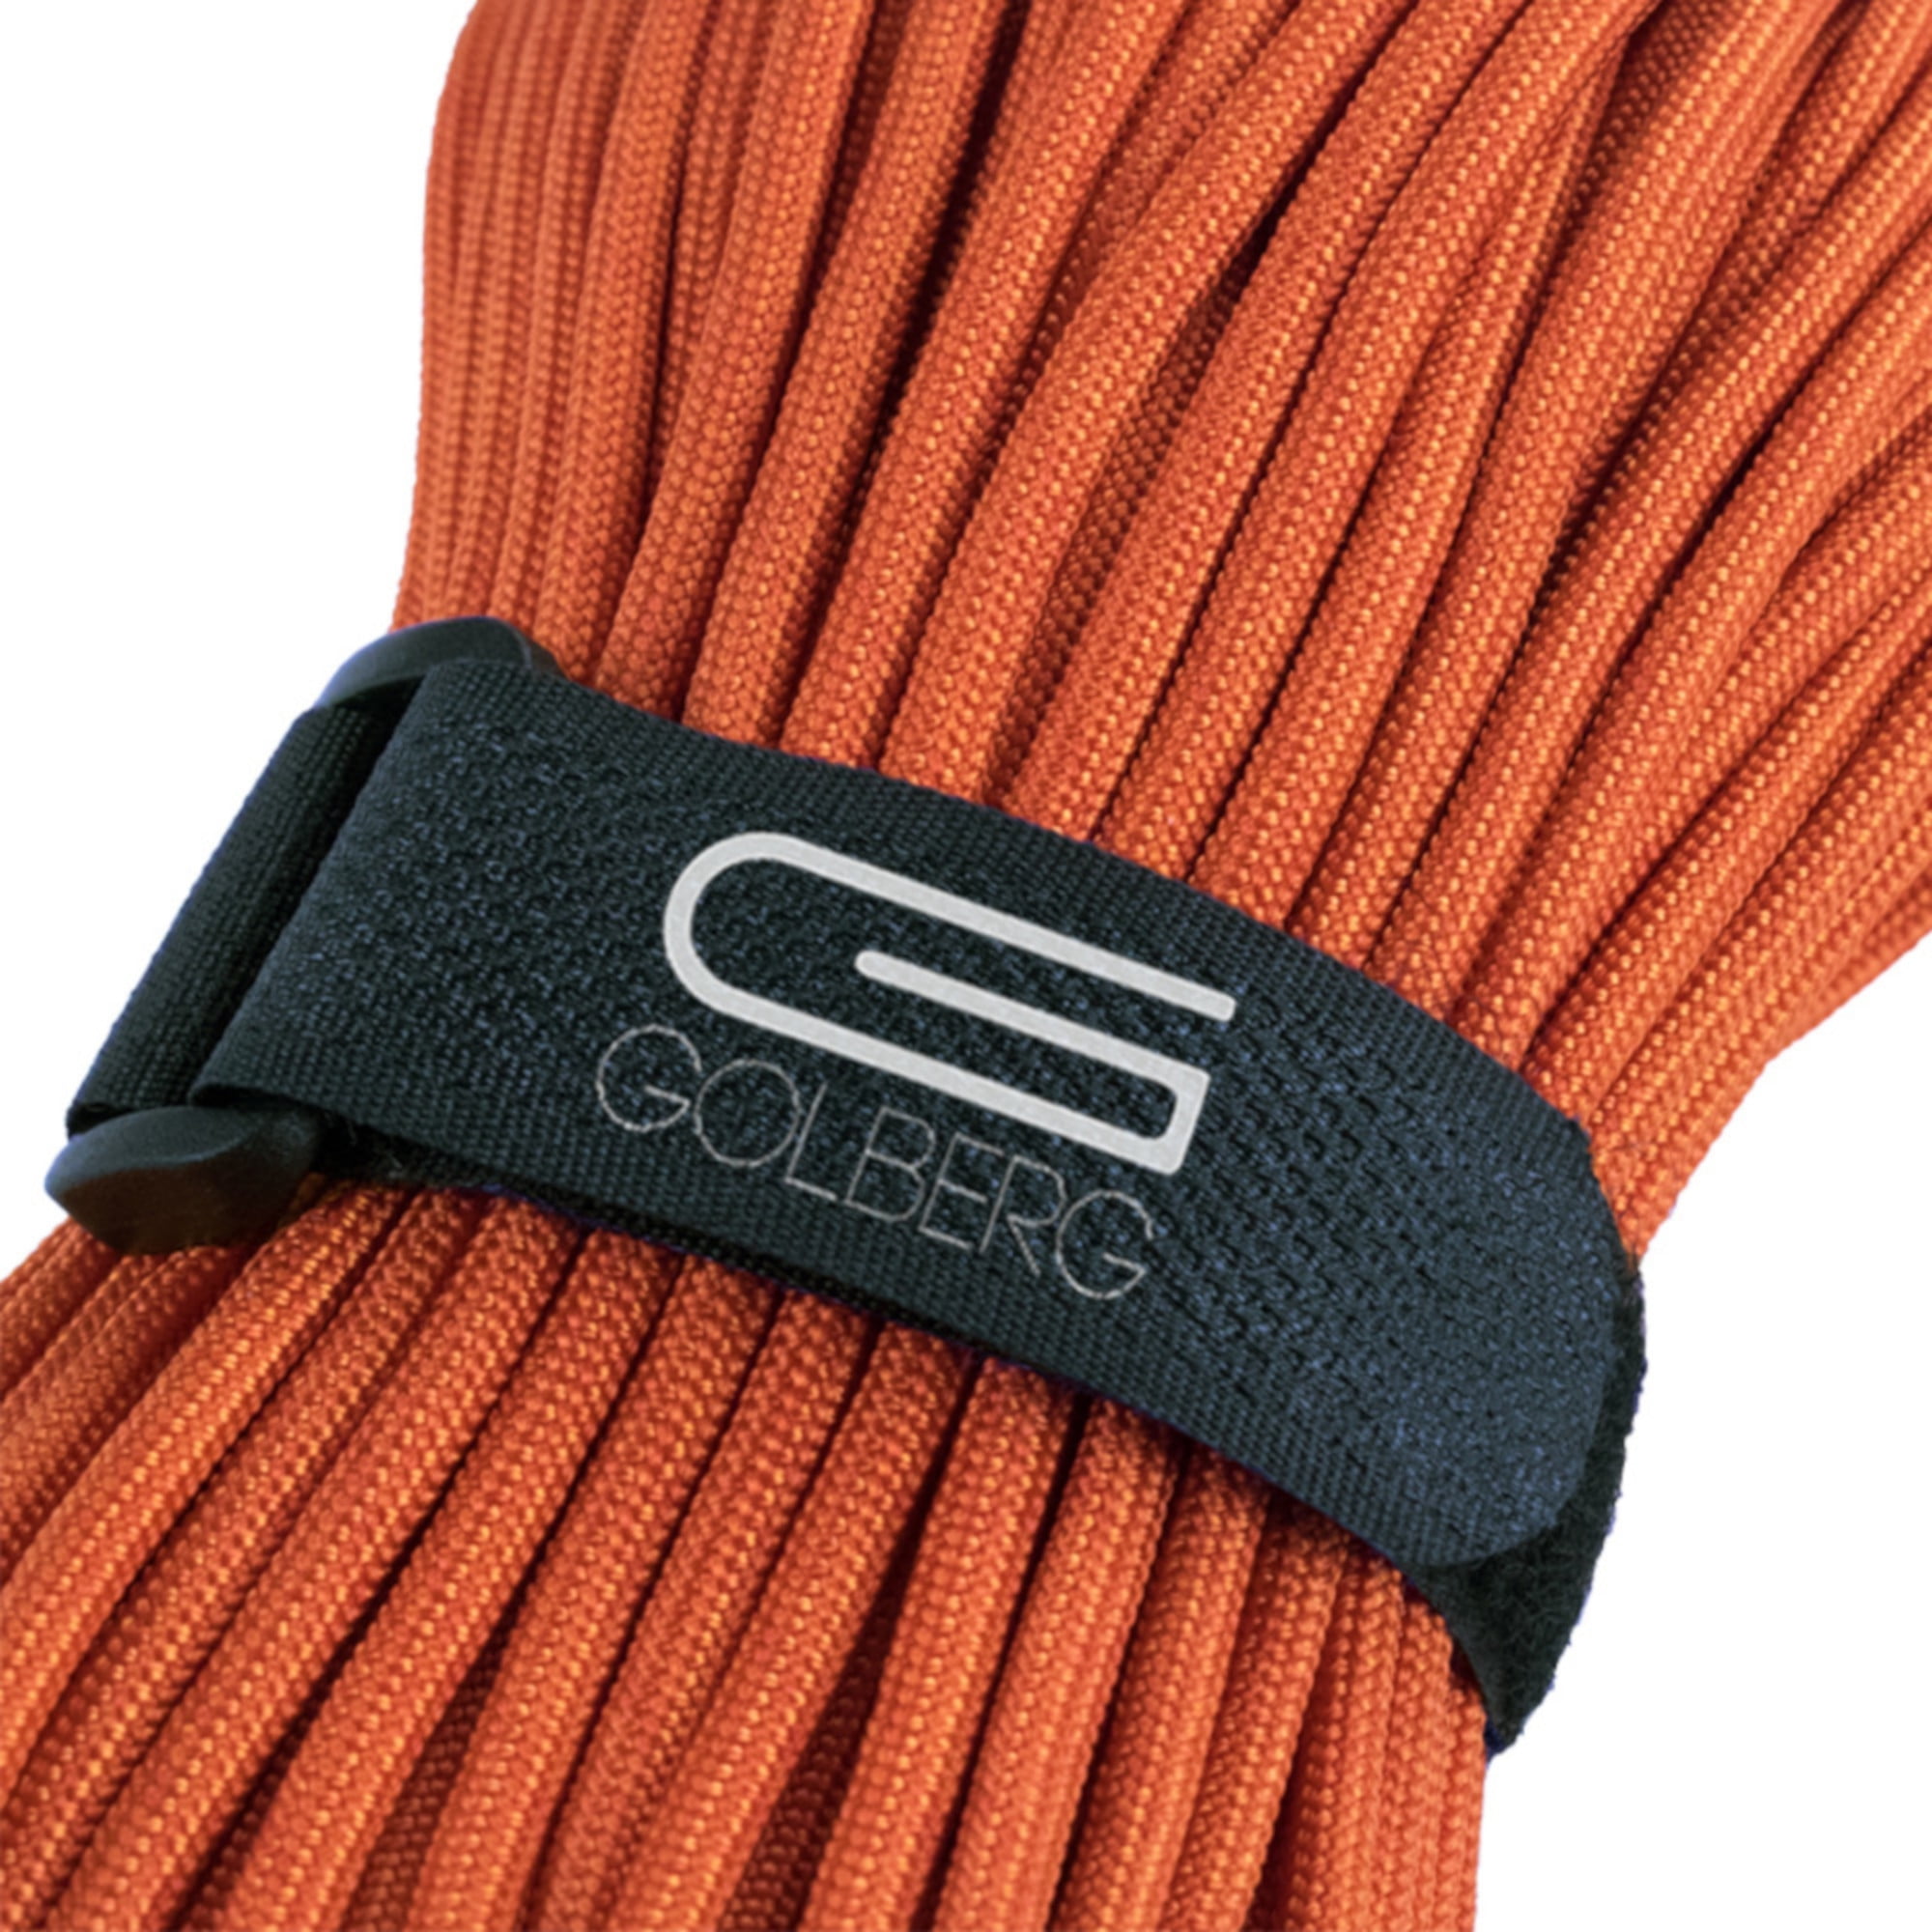 GOLBERG G MIL-SPEC-C-5040-H Authentic Mil-Spec 550 Paracord Military Survival Rope 550 Lb Type III 7 Strand 5/32 Inch Parachute Rope 100% Nylon Made in USA 